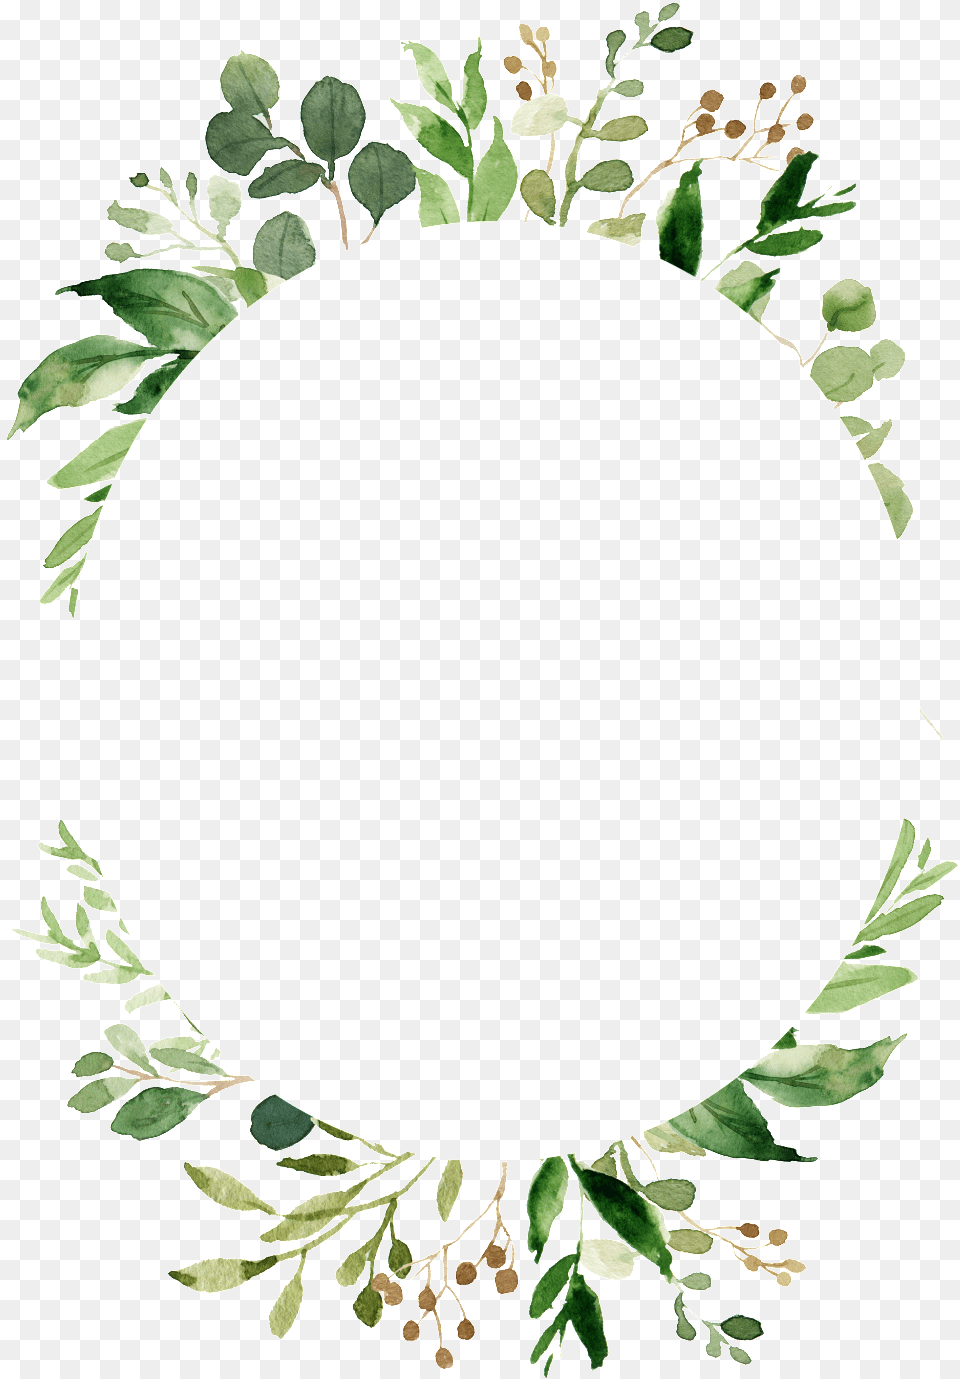 This Backgrounds Is Oval Border Cartoon Save The Date Template Green, Leaf, Plant, Accessories, Art Free Png